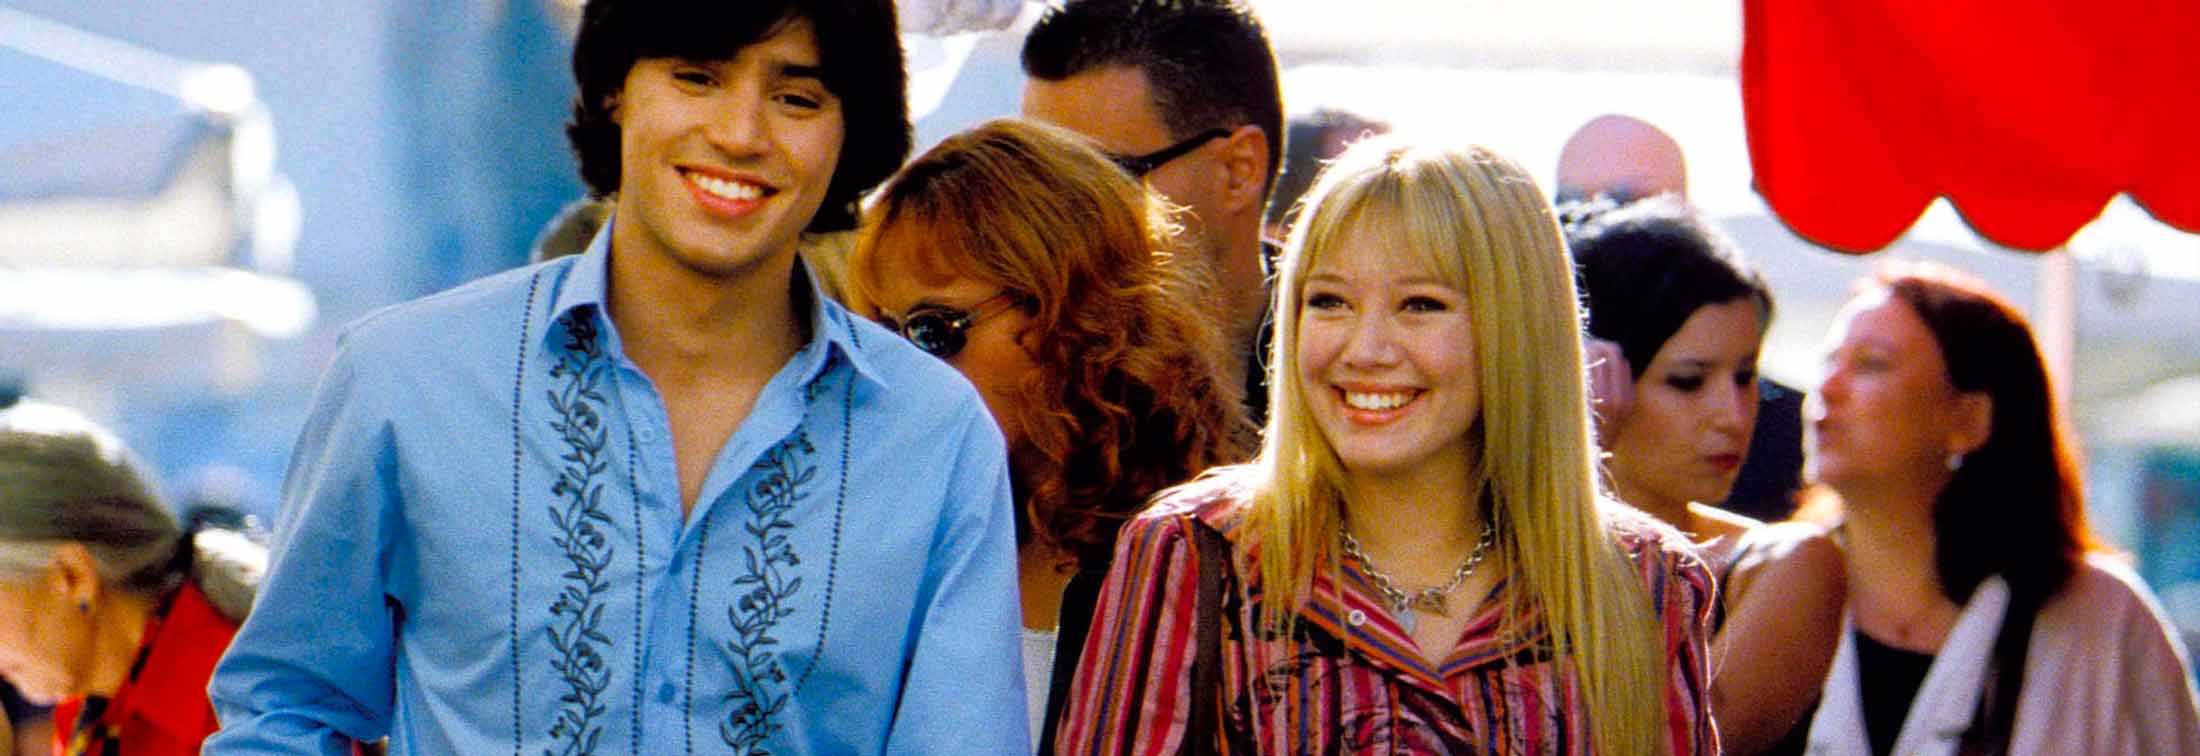 The Lizzie Mcguire Movie Shut Your Pie Hole It S 20 Years Of What